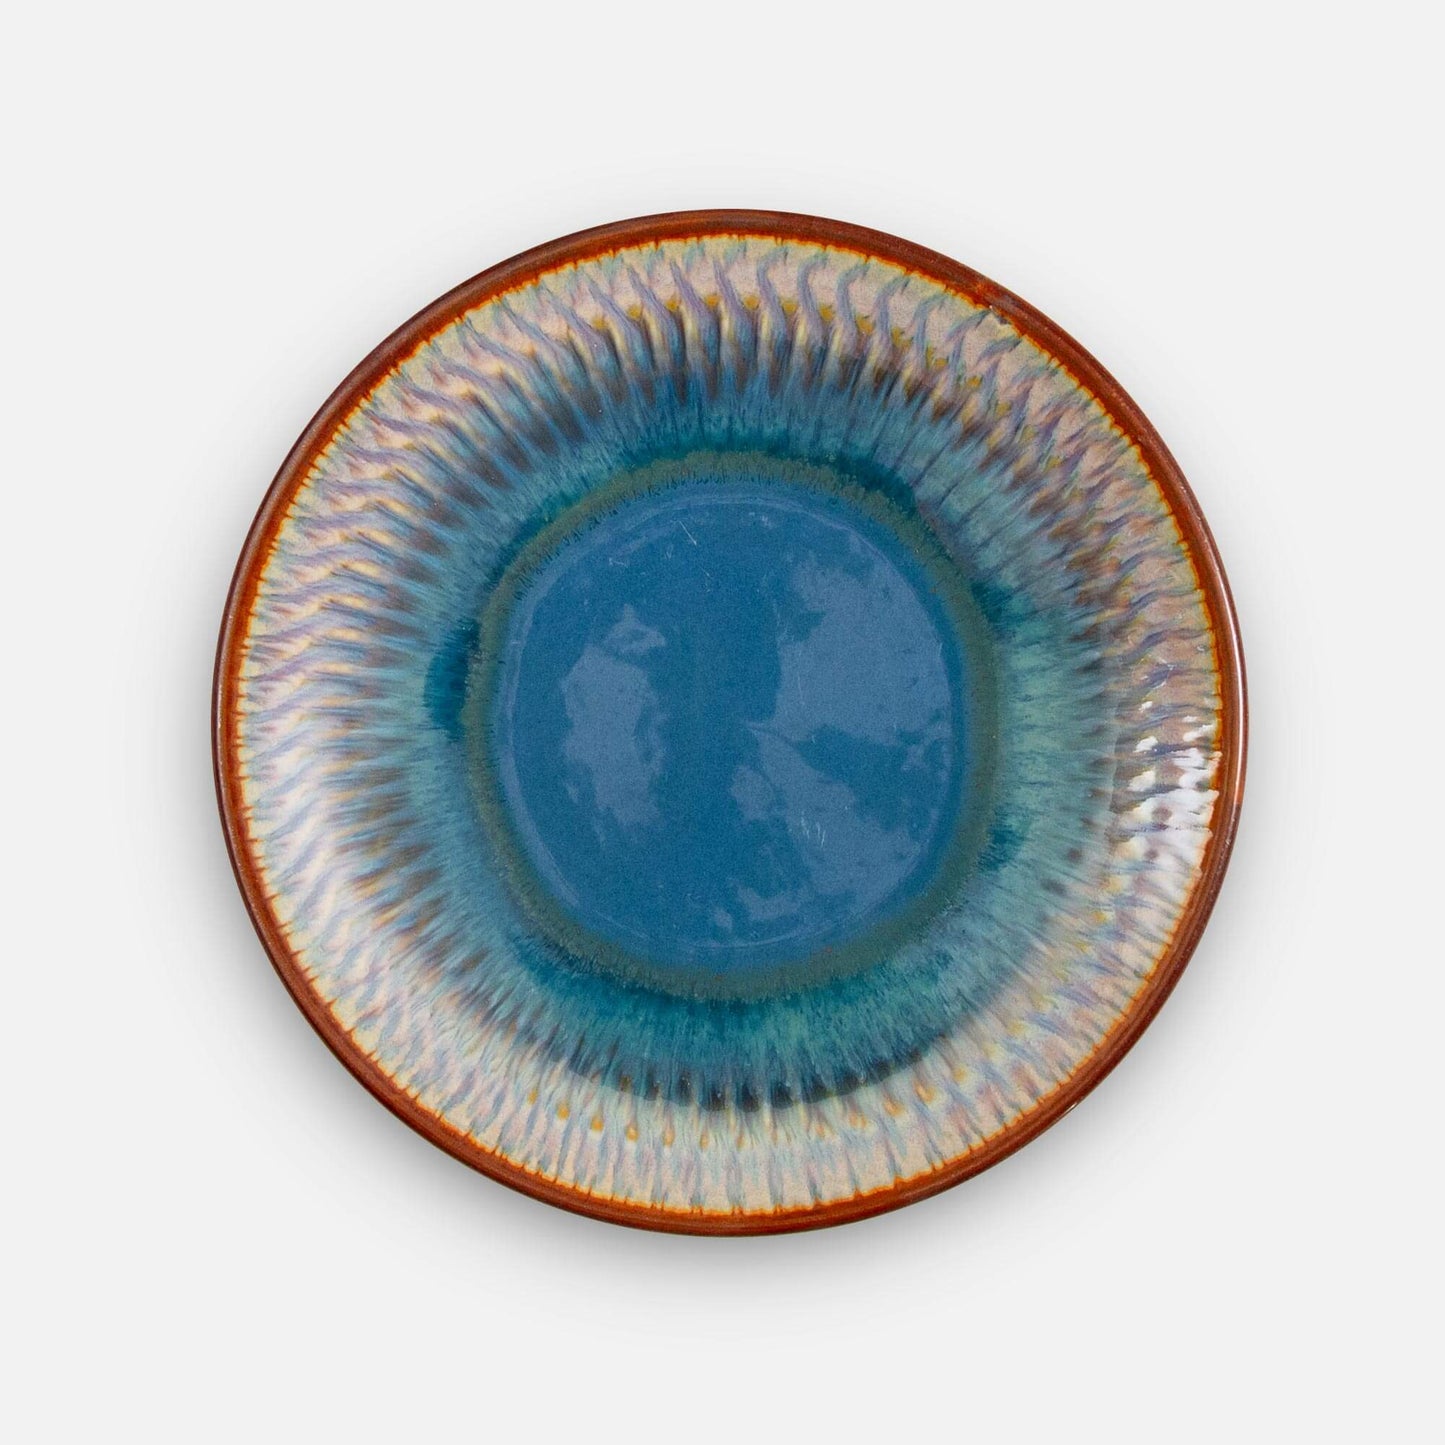 Handmade Pottery Footed Dessert Plate in Blue Oribe pattern made by Georgetown Pottery in Maine